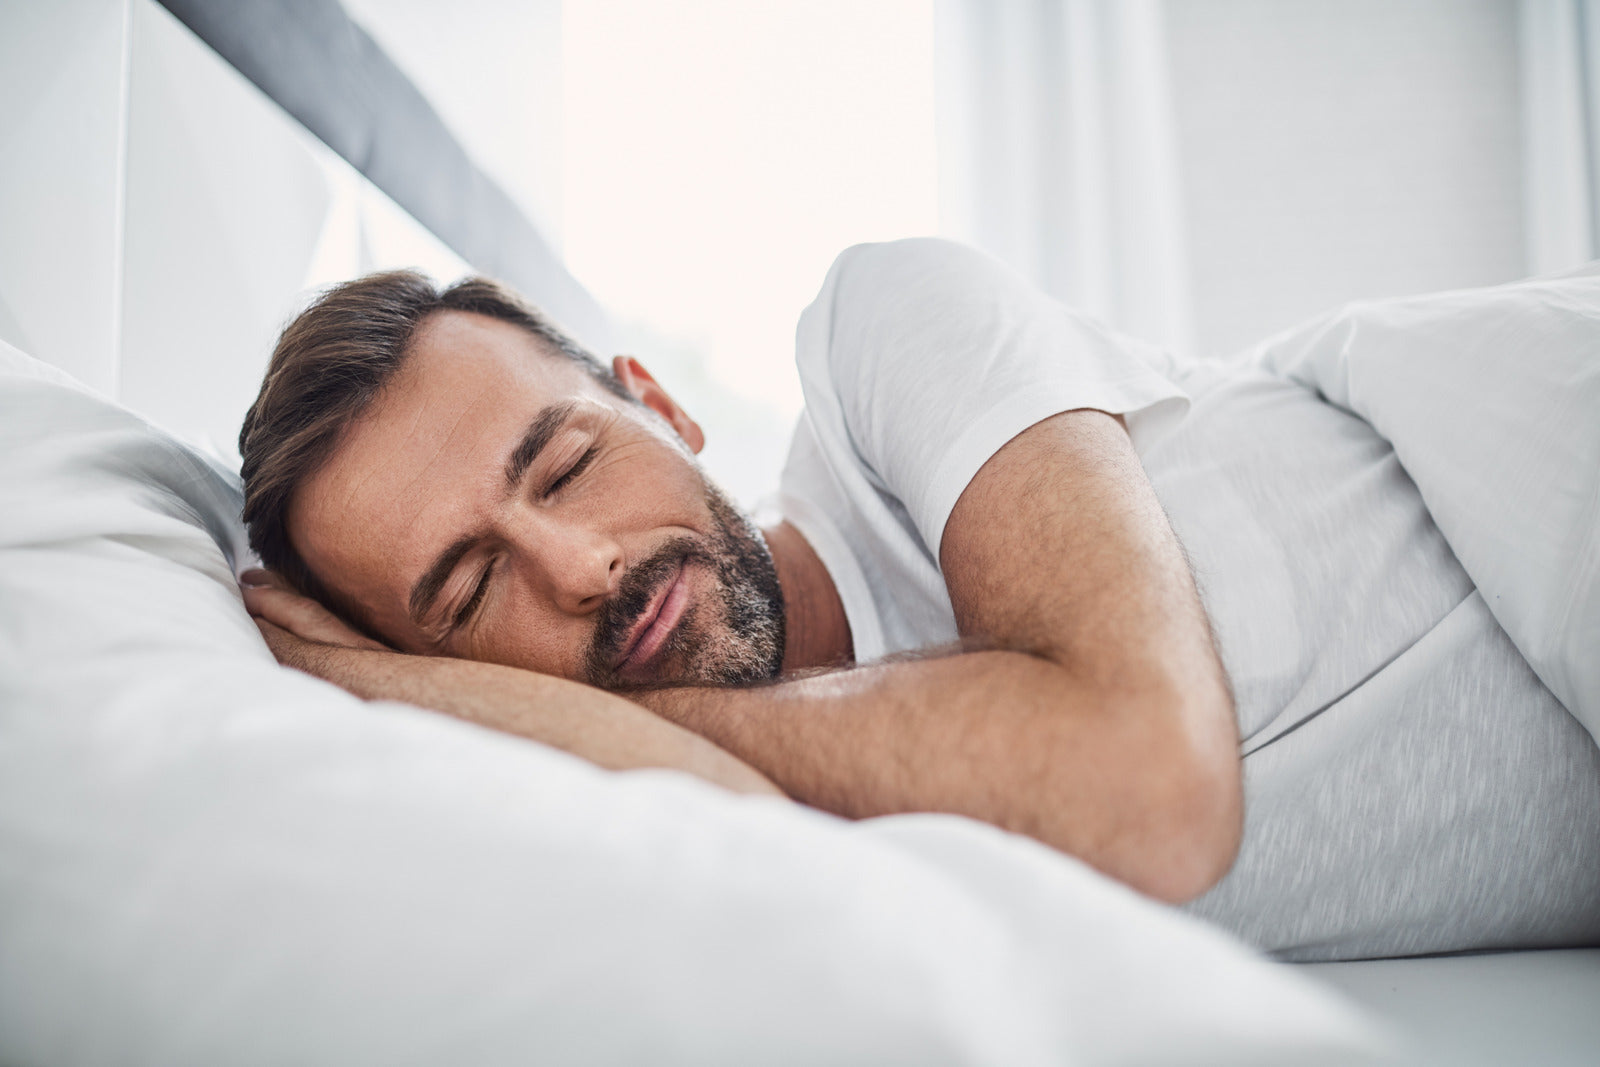 What Are the Benefits of Taking Melatonin Supplements?